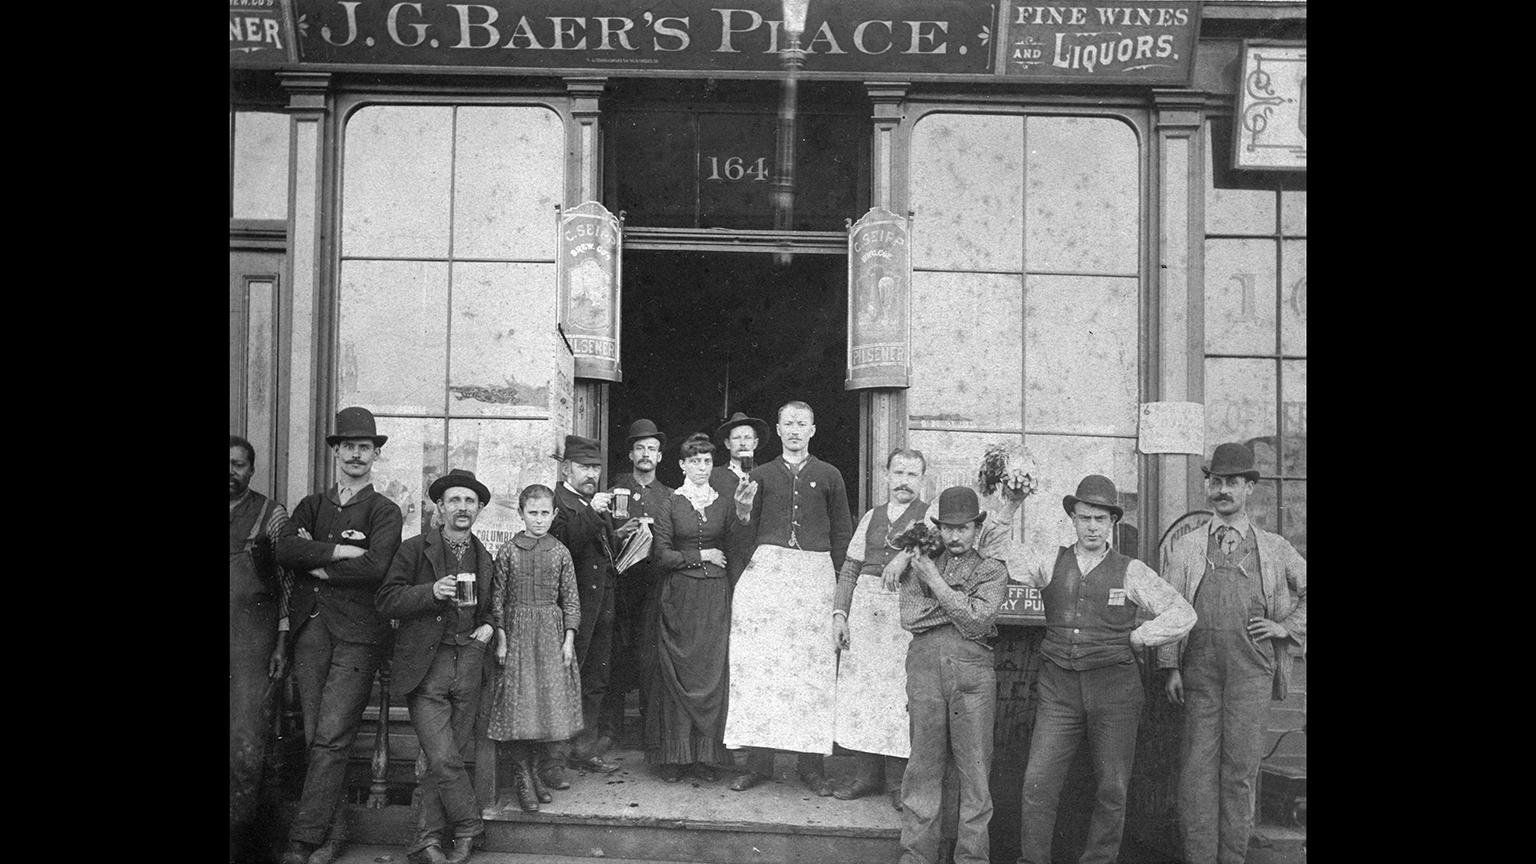 A group of Chicagoans outside J.G. Baer’s Place, where signs advertise pilsners made by the C. Seipp Brew Co., which survived the Great Chicago Fire of 1871. (Chicago History Museum)